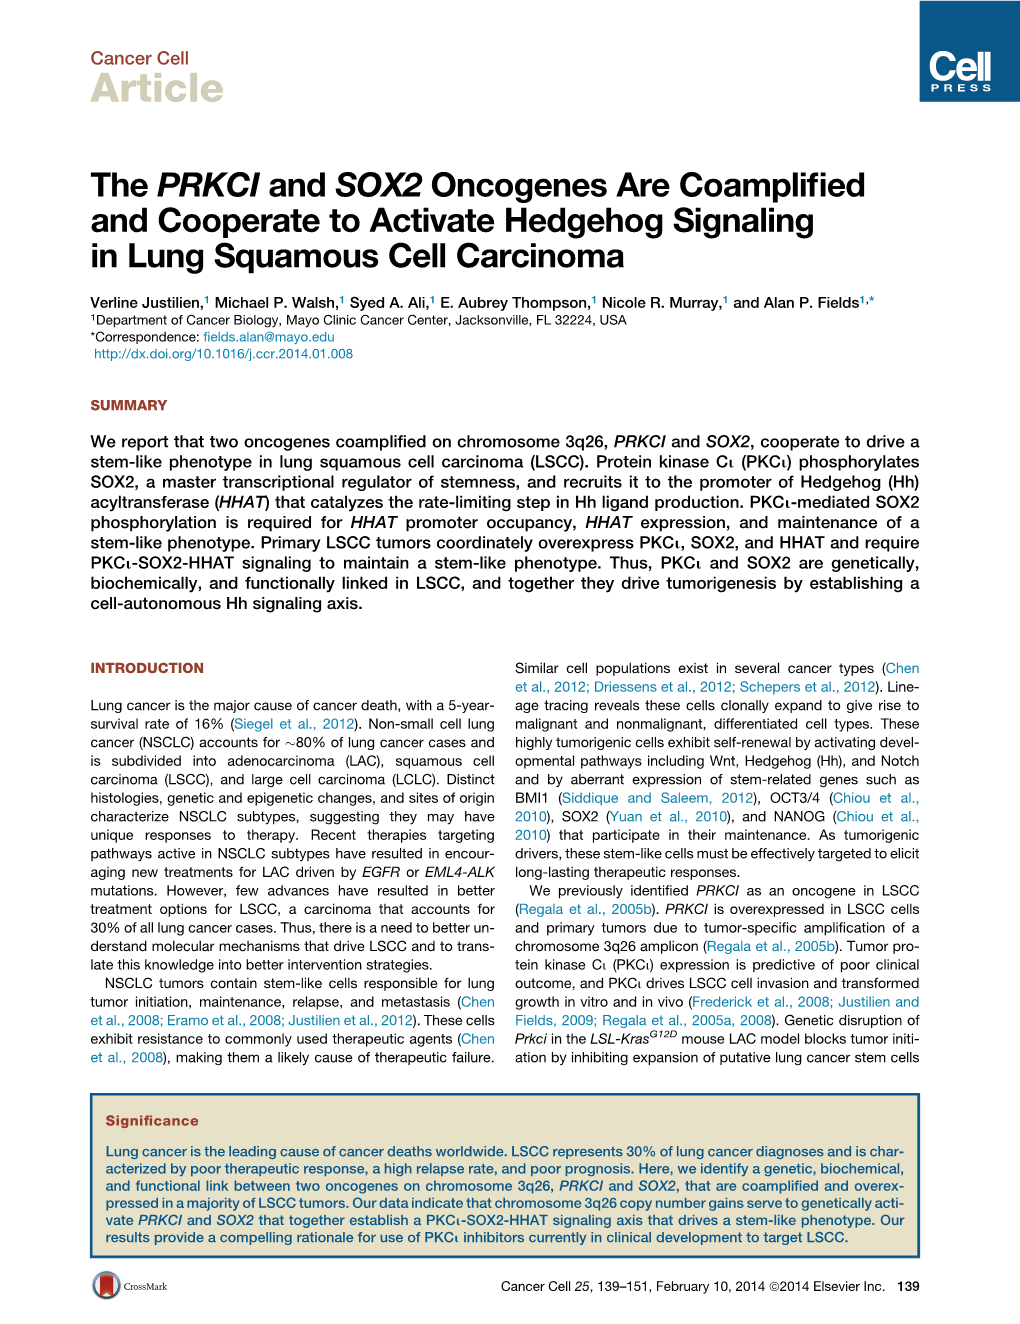 The PRKCI and SOX2 Oncogenes Are Coamplified and Cooperate to Activate Hedgehog Signaling in Lung Squamous Cell Carcinoma